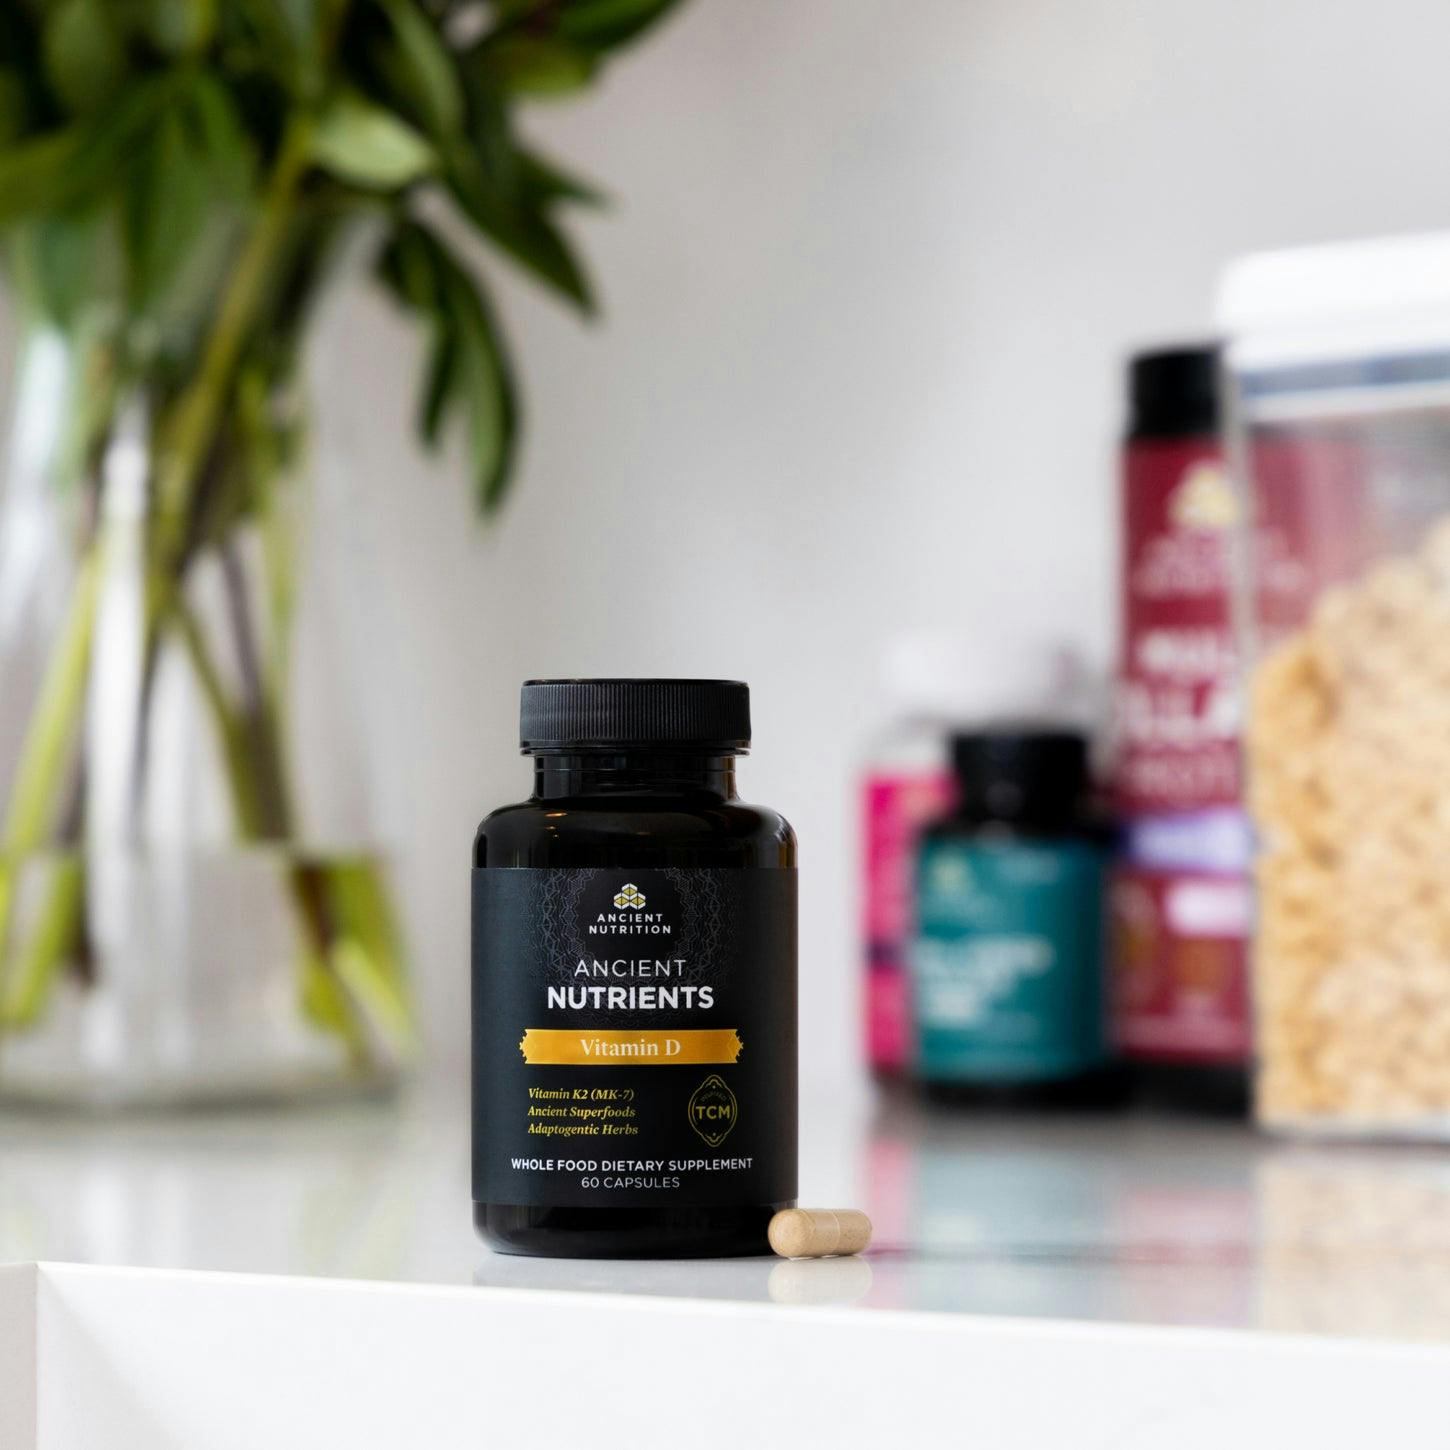 vitamin d on a counter with other supplements in the background